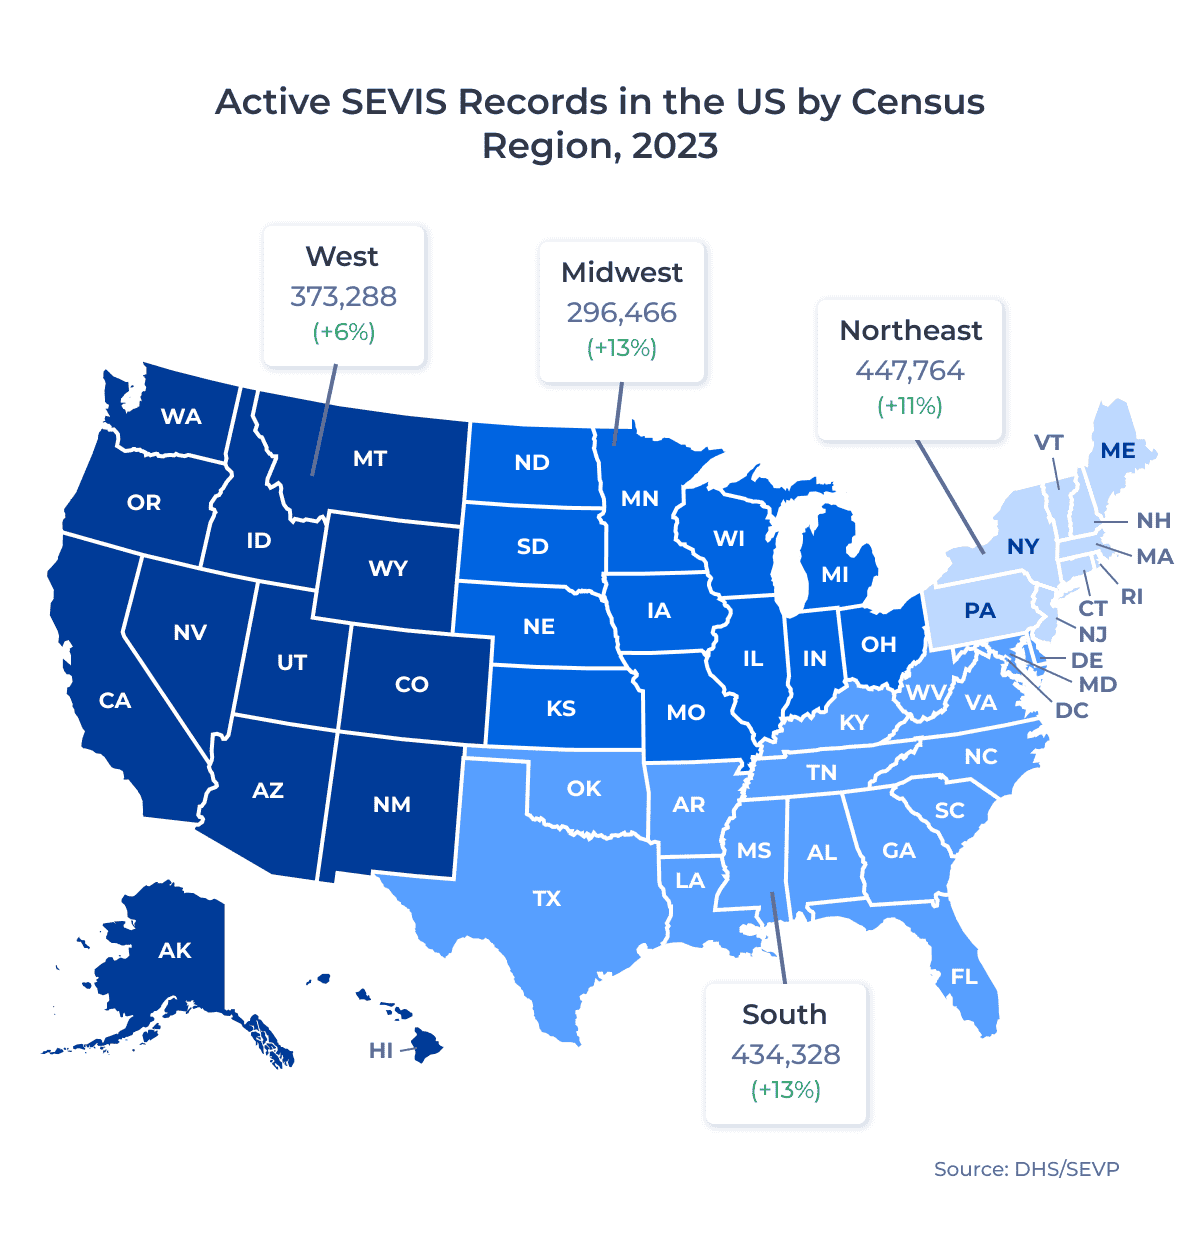 A map of the United States showing the number of active SEVIS records in the US by census region in 2023.